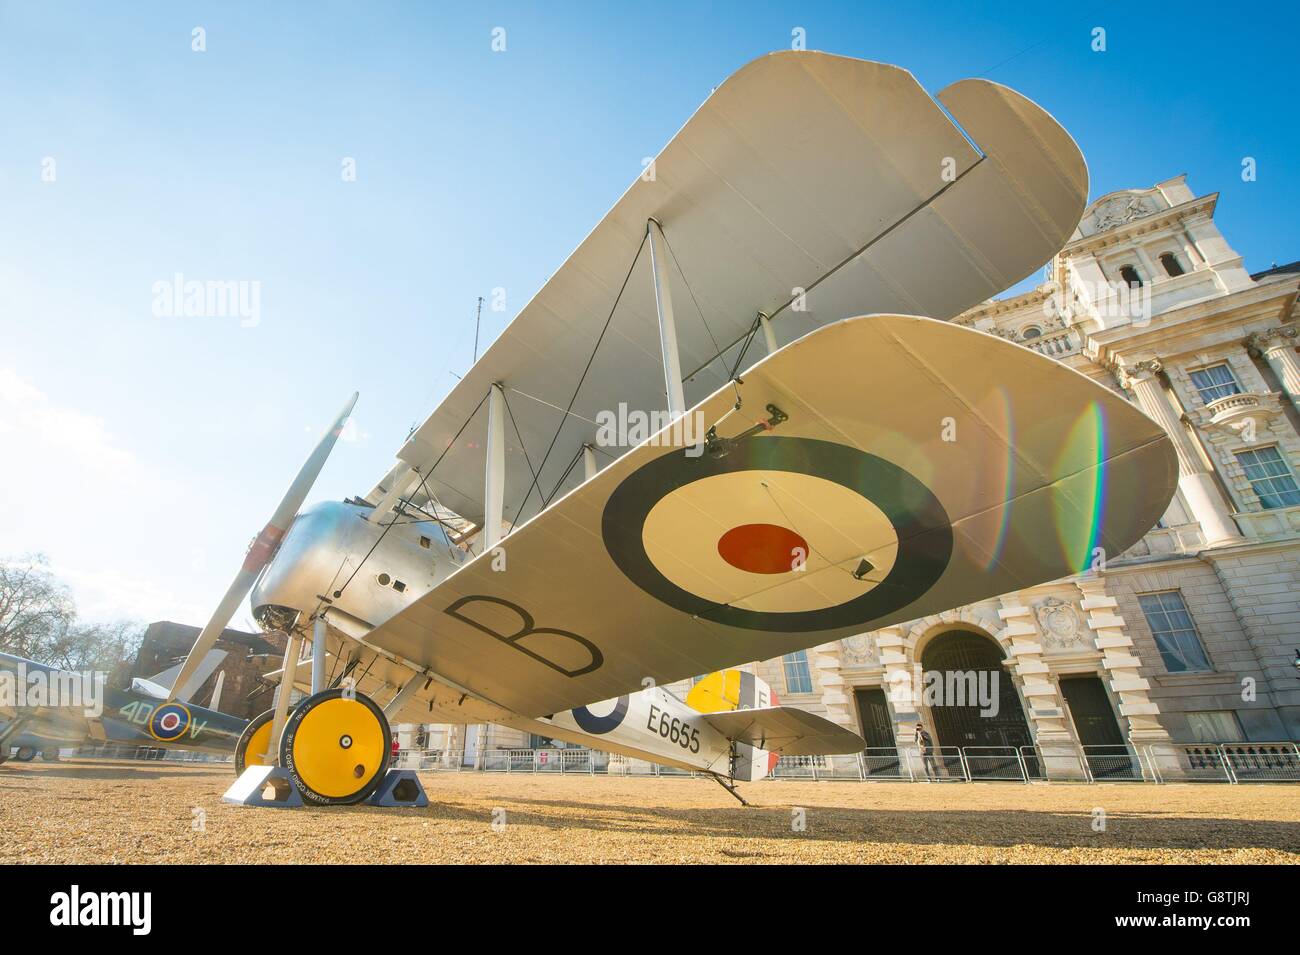 A Sopwith Snipe is displayed on Horse Guards Parade, in central London ahead of the 100th anniversary of the RAF which was formed in 2018. Stock Photo